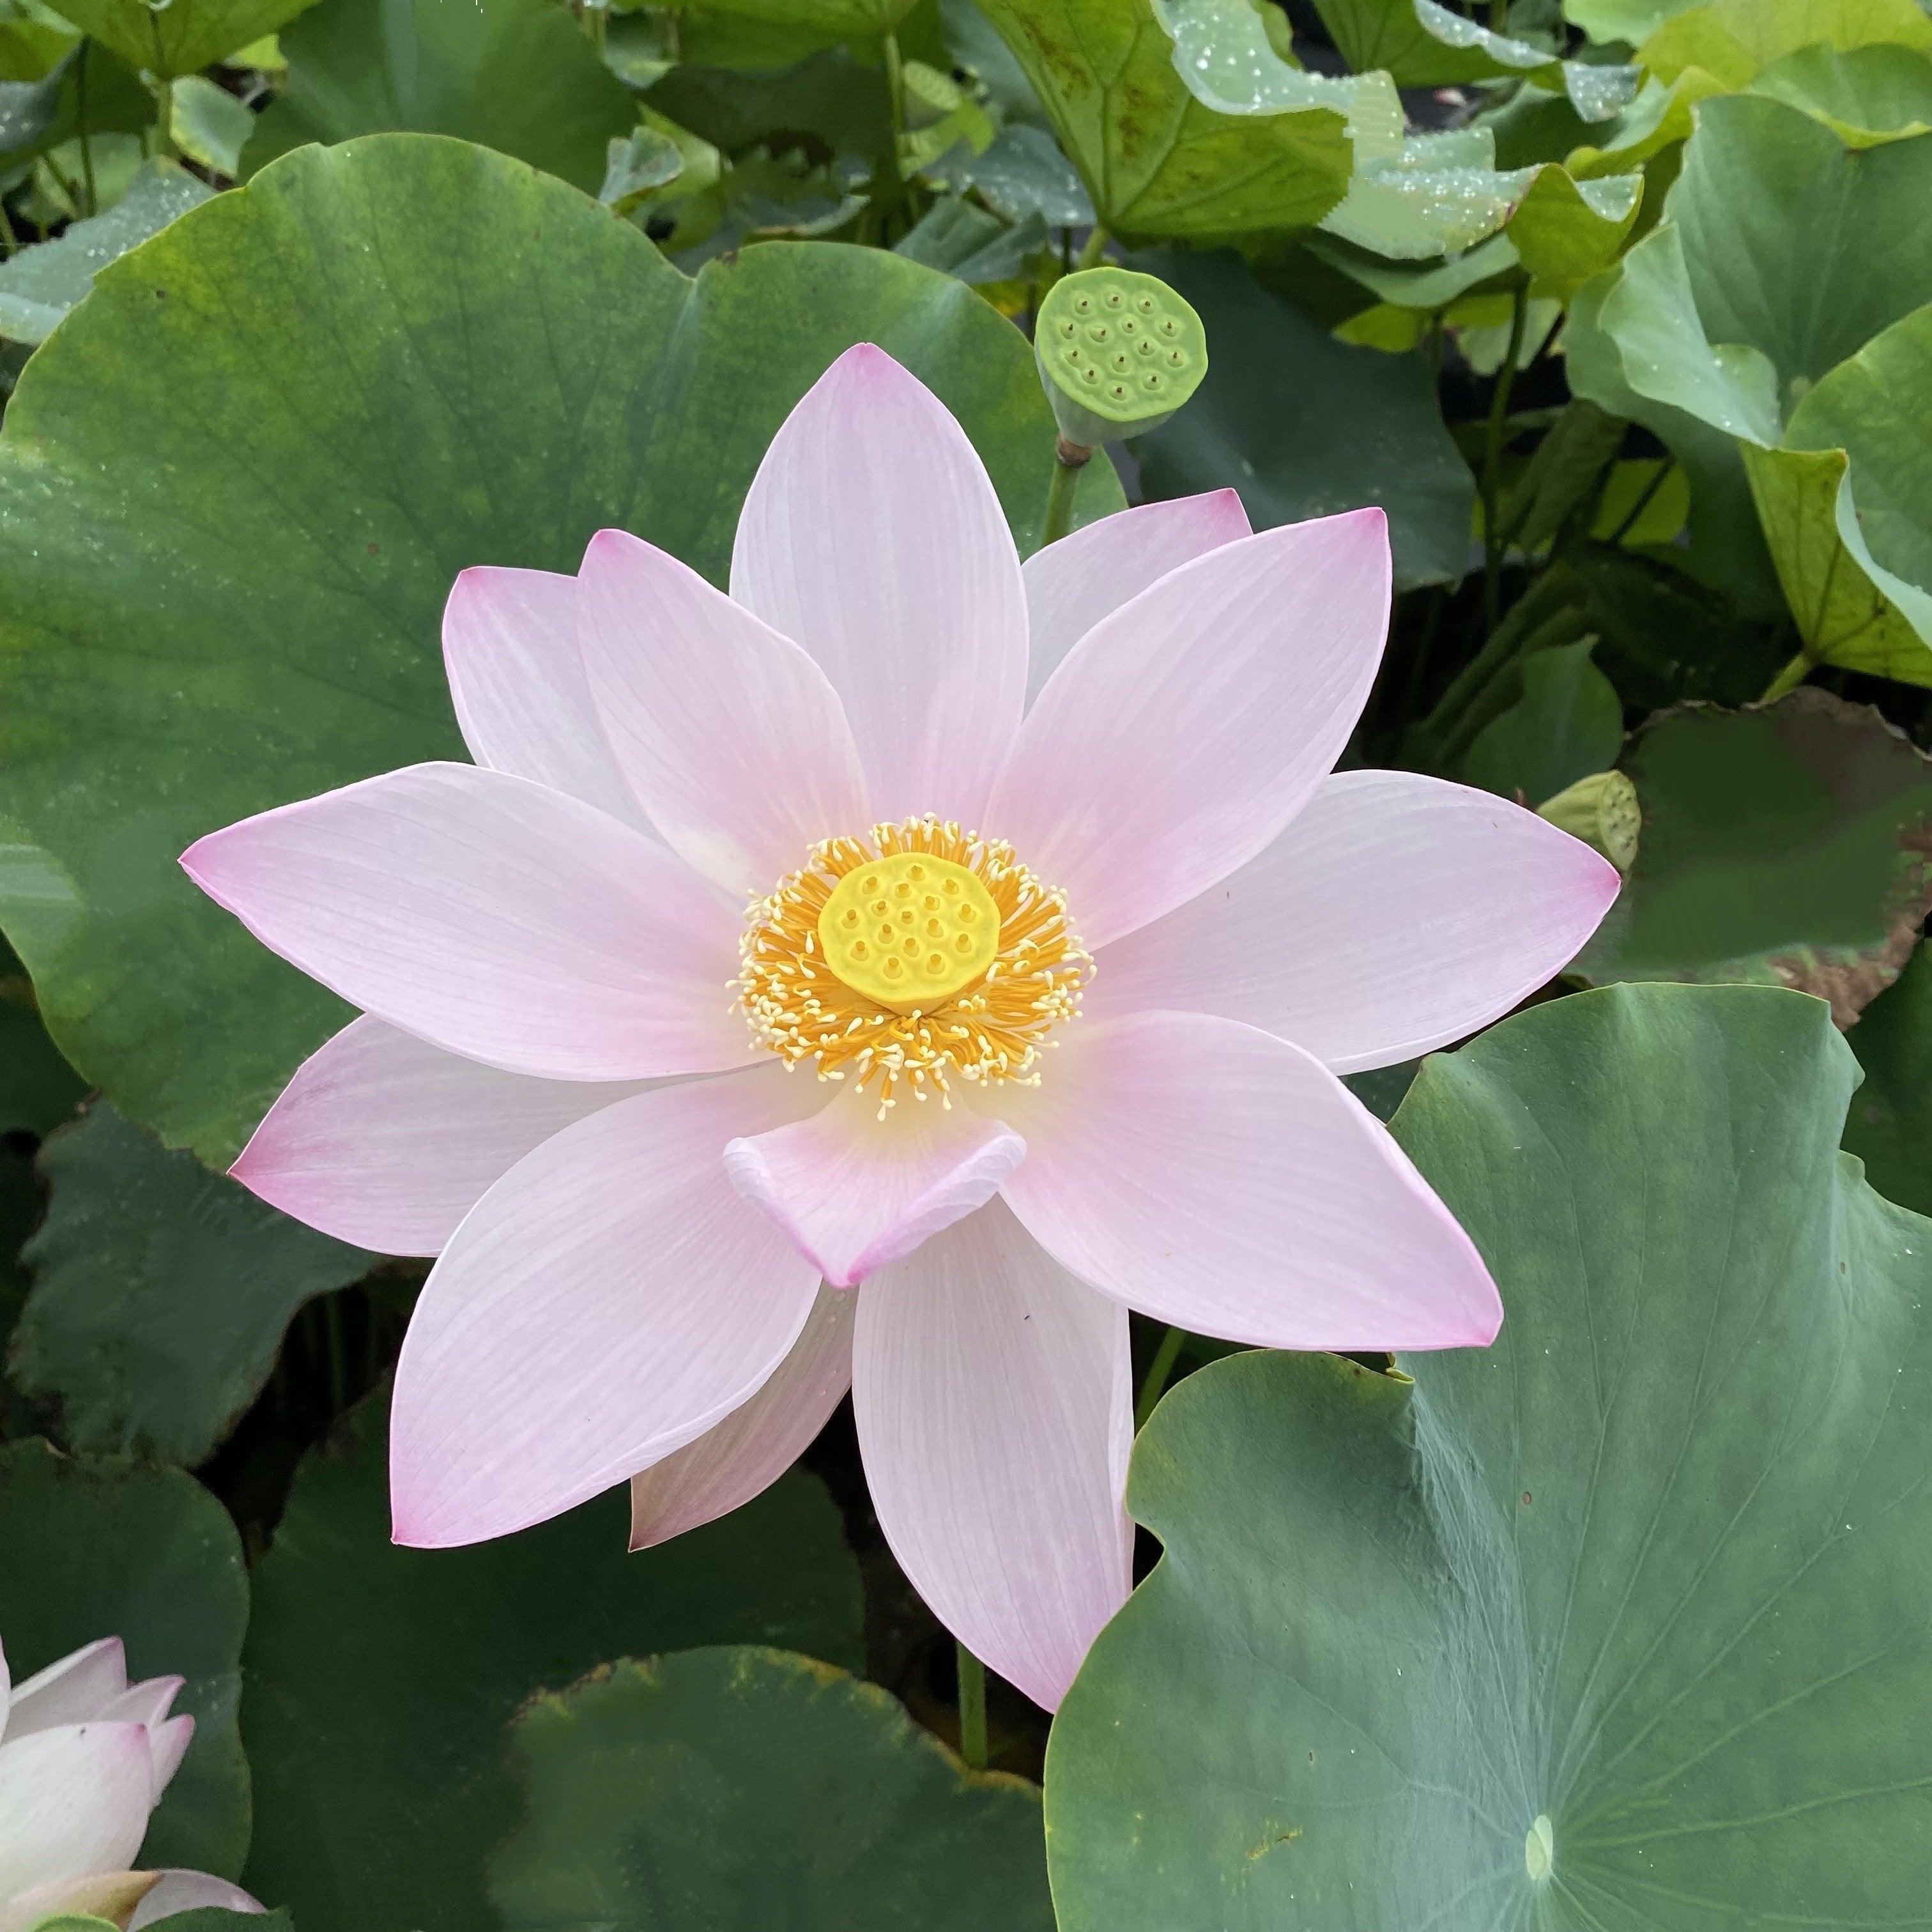 Reflection - The Perfect Blush of Pink Lotus (Bare Root) - Play It Koi